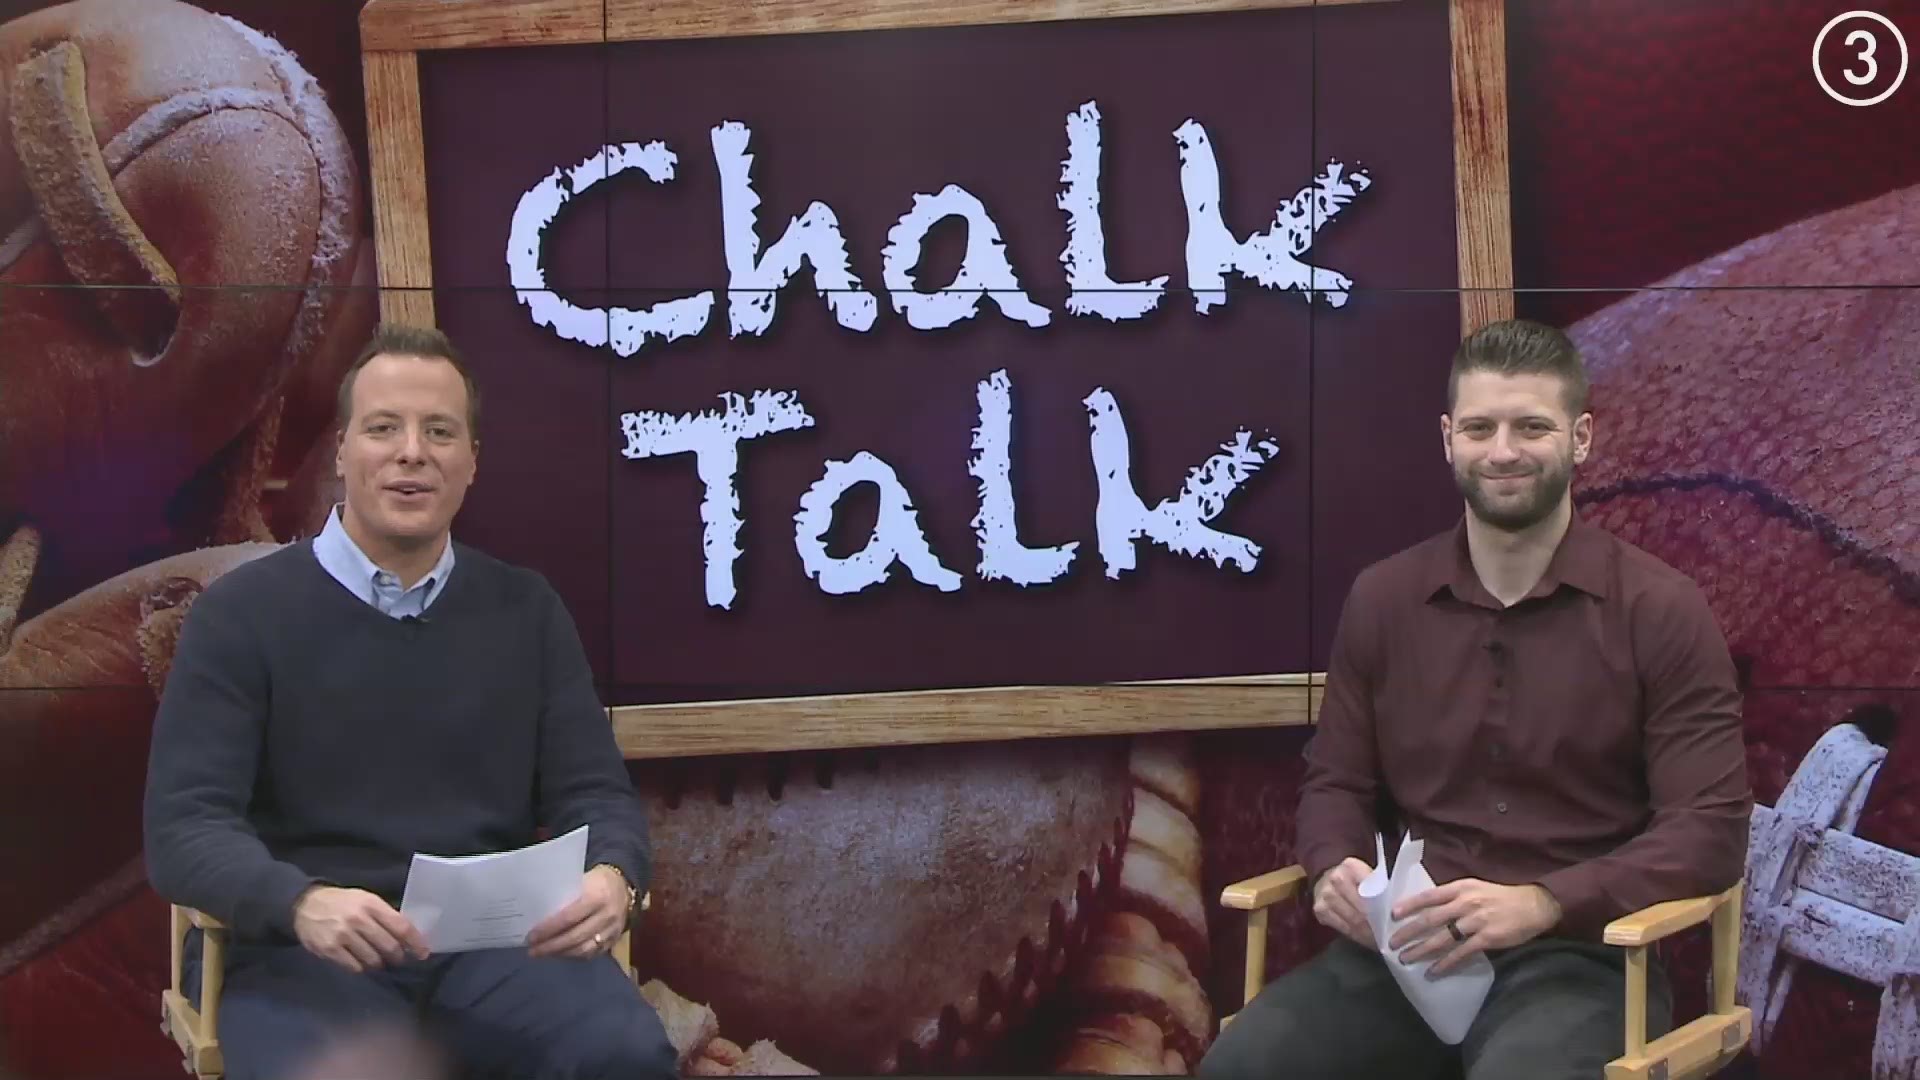 On the 11th episode of WKYC's Chalk Talk, Nick Camino and Ben Axelrod discuss and make their picks for Week 12 of the college football season and Week 11 of the NFL.